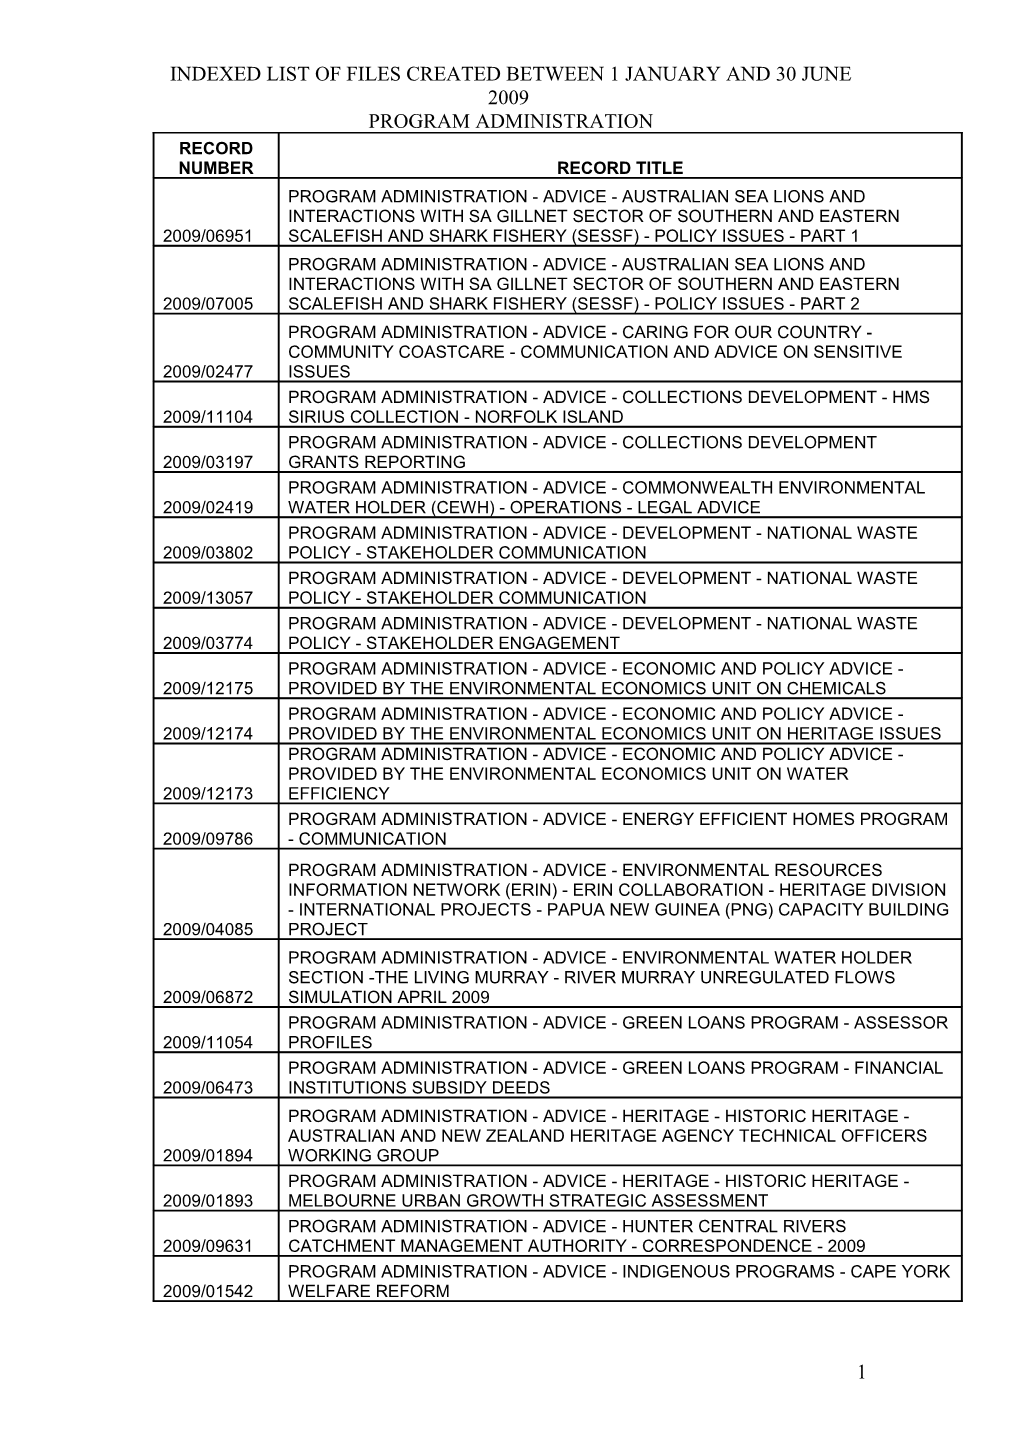 INDEXED LIST of FILES CREATED BETWEEN 1 JANUARY and 30 JUNE 2009: Program Administration